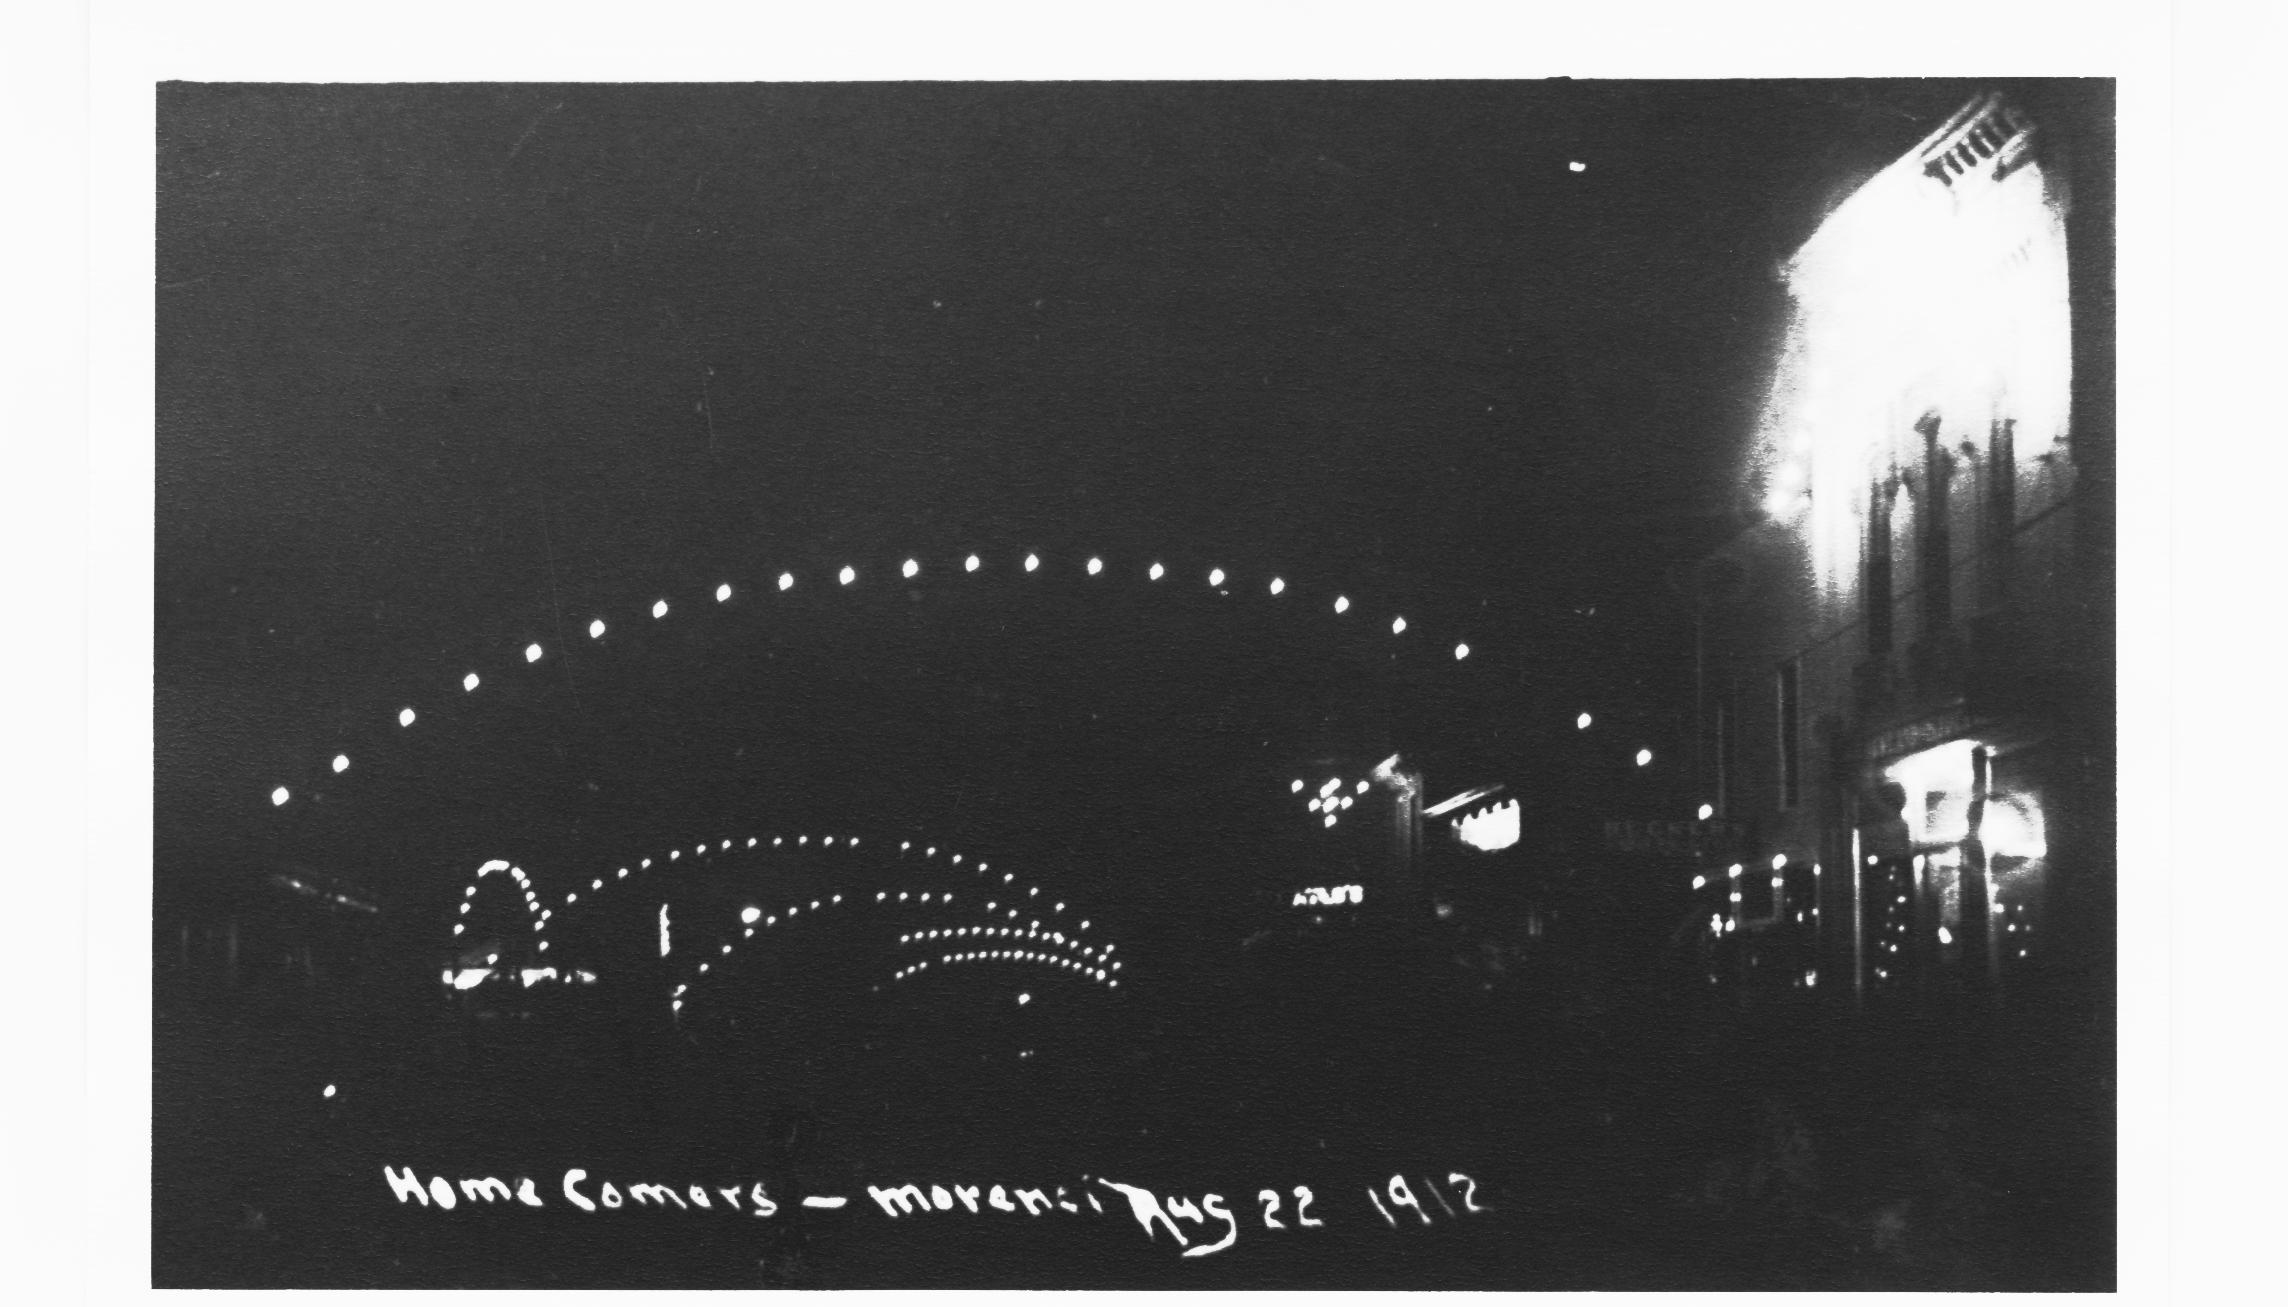 Homecomers’ celebration, 1912, Morenci, Michigan.  Taken at night.  Probably first night photo of a street fair.